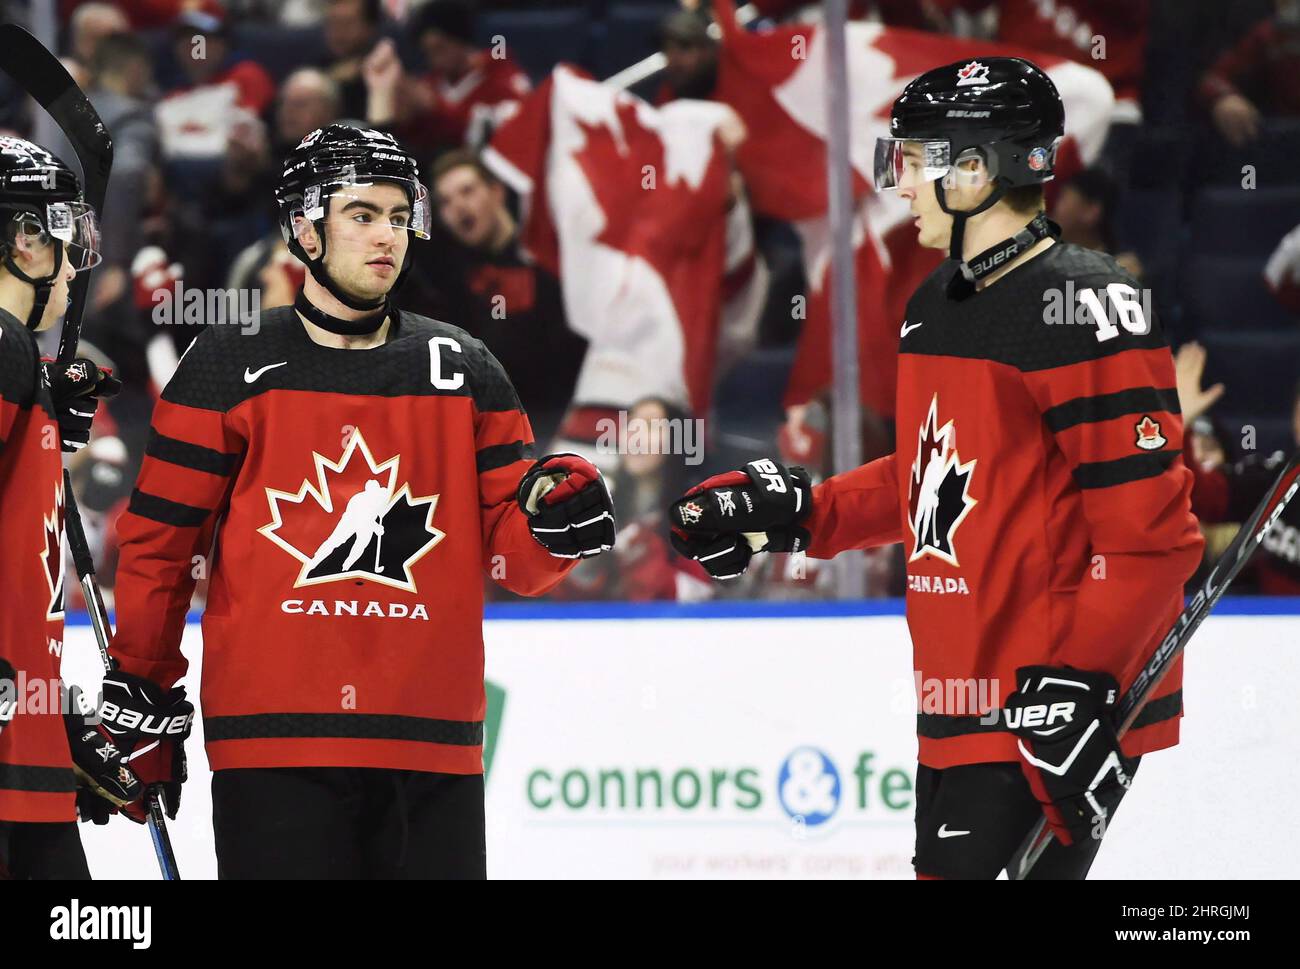 Canada's Dillon Dube, left, celebrates a goal against Switzerland with Taylor Raddysh (16) during third period quarter-final IIHF World Junior Championships hockey action in Buffalo, N.Y. on Tuesday, January 2, 2018. A change of scenery seems to be reinvigorating hockey fans' interest in an annual holiday tradition.Ticket demand for the 2019 International Ice Hockey Federation's World Junior Championship in Vancouver and Victoria has 'exceeded expectations,' said Riley Wiwchar, director of the tournament.THE CANADIAN PRESS/Nathan Denette Stock Photo